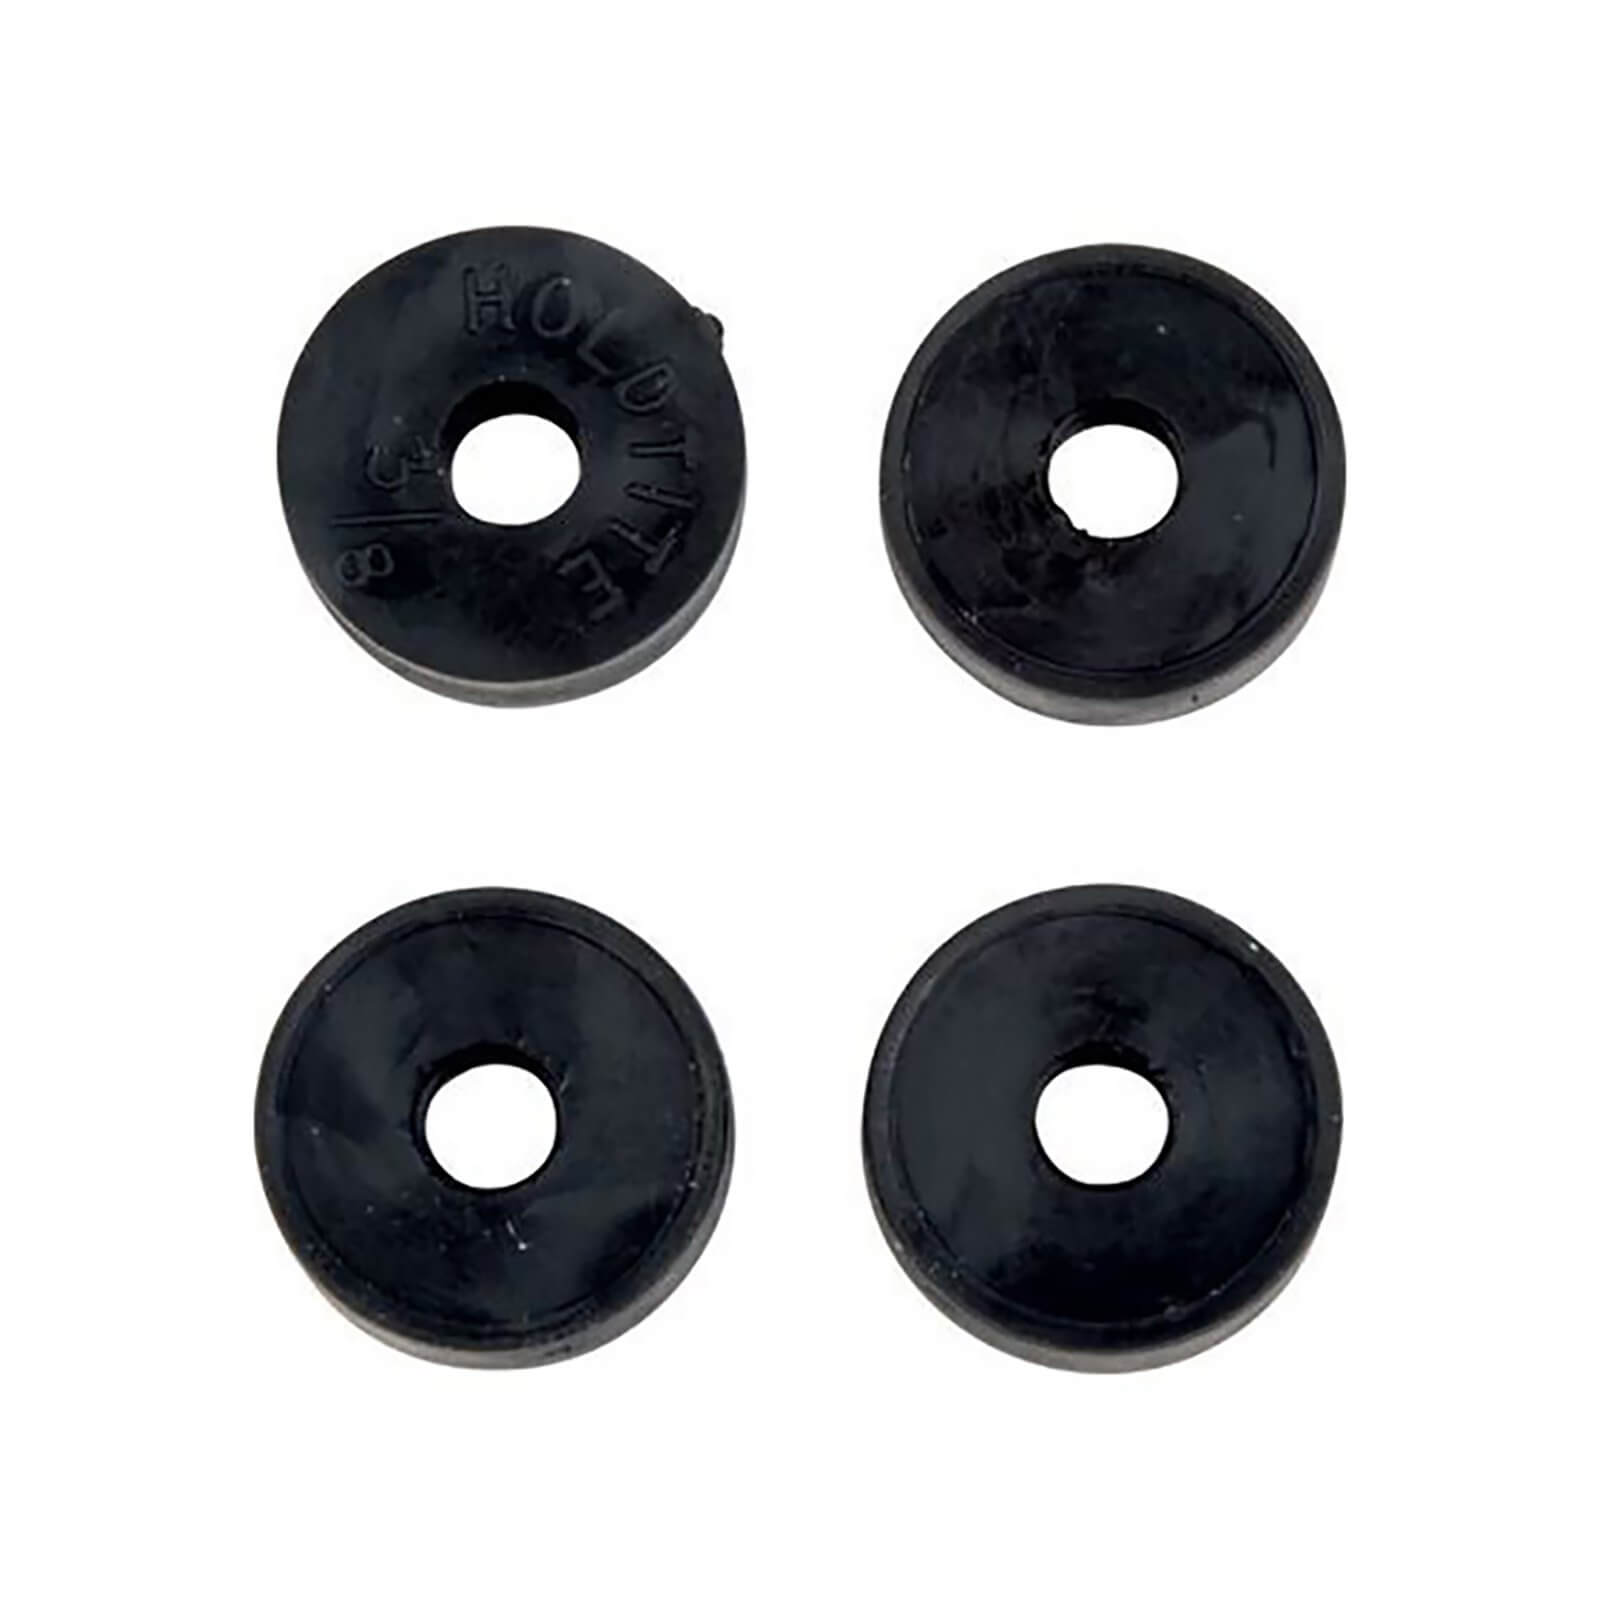 Photo of Flat Tap Washers - 10mm - 4 Pack